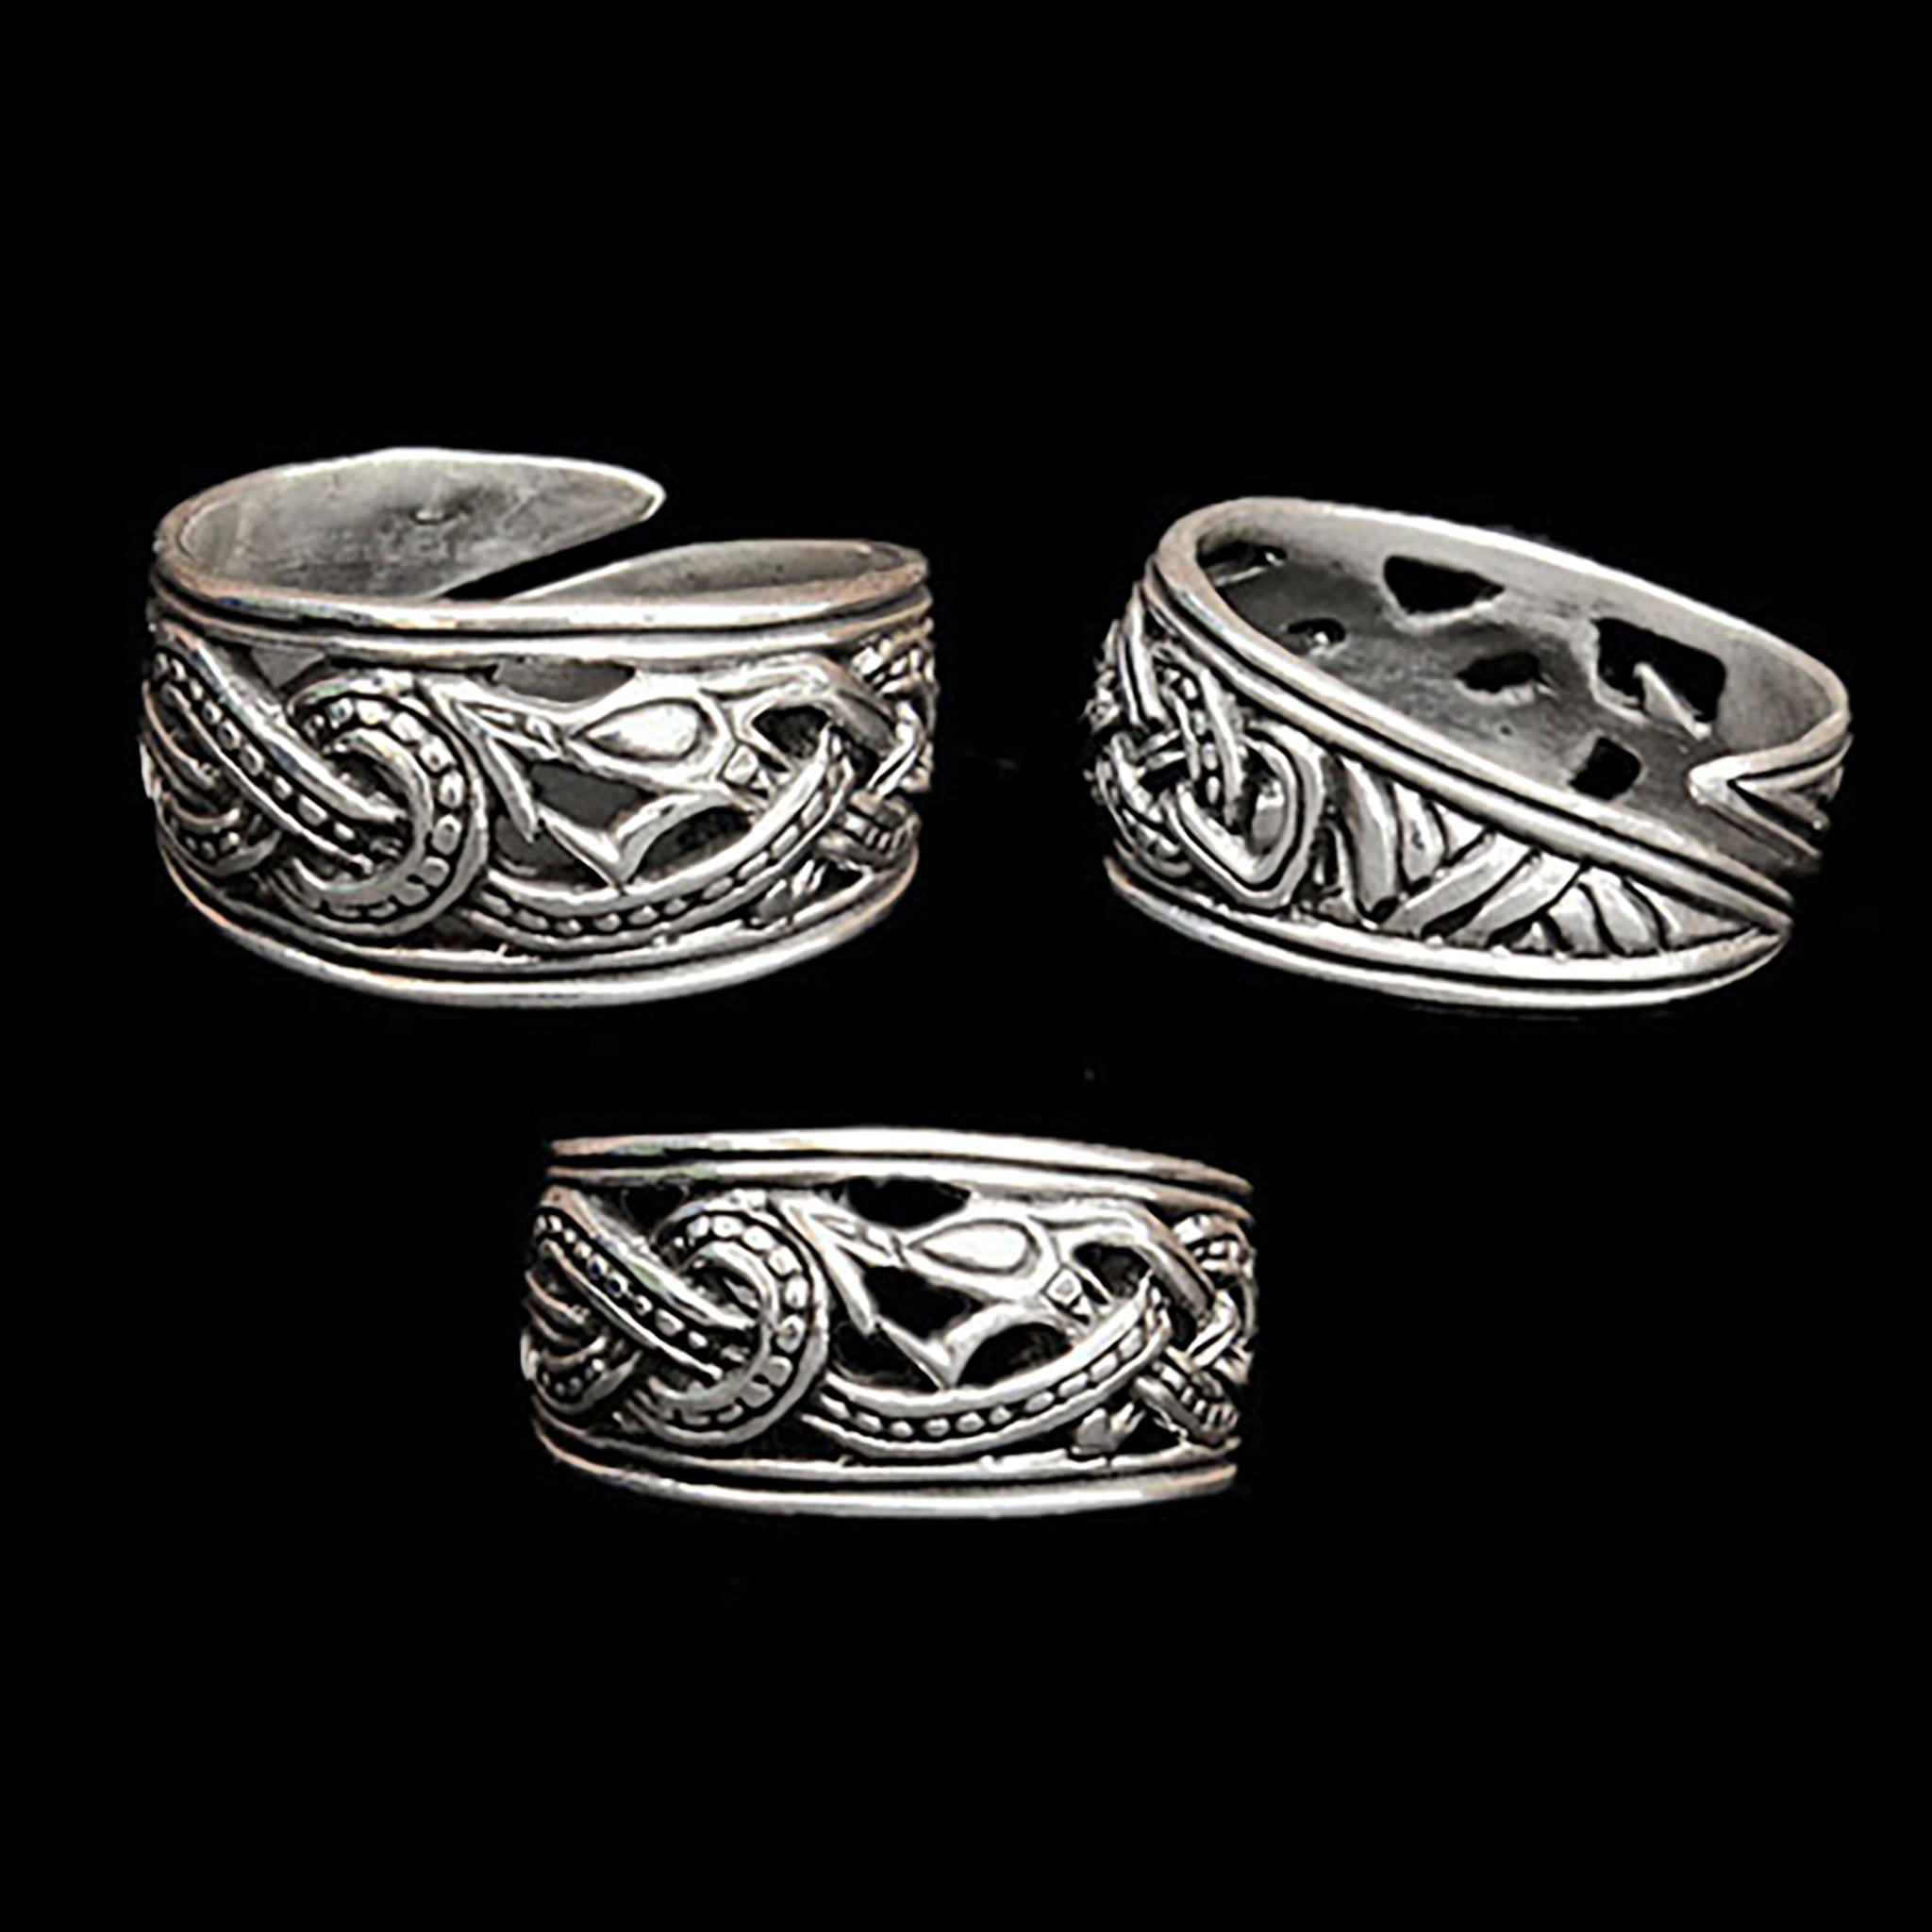 Silver Openwork Ringerike Viking Dragon Ring - Different Angles